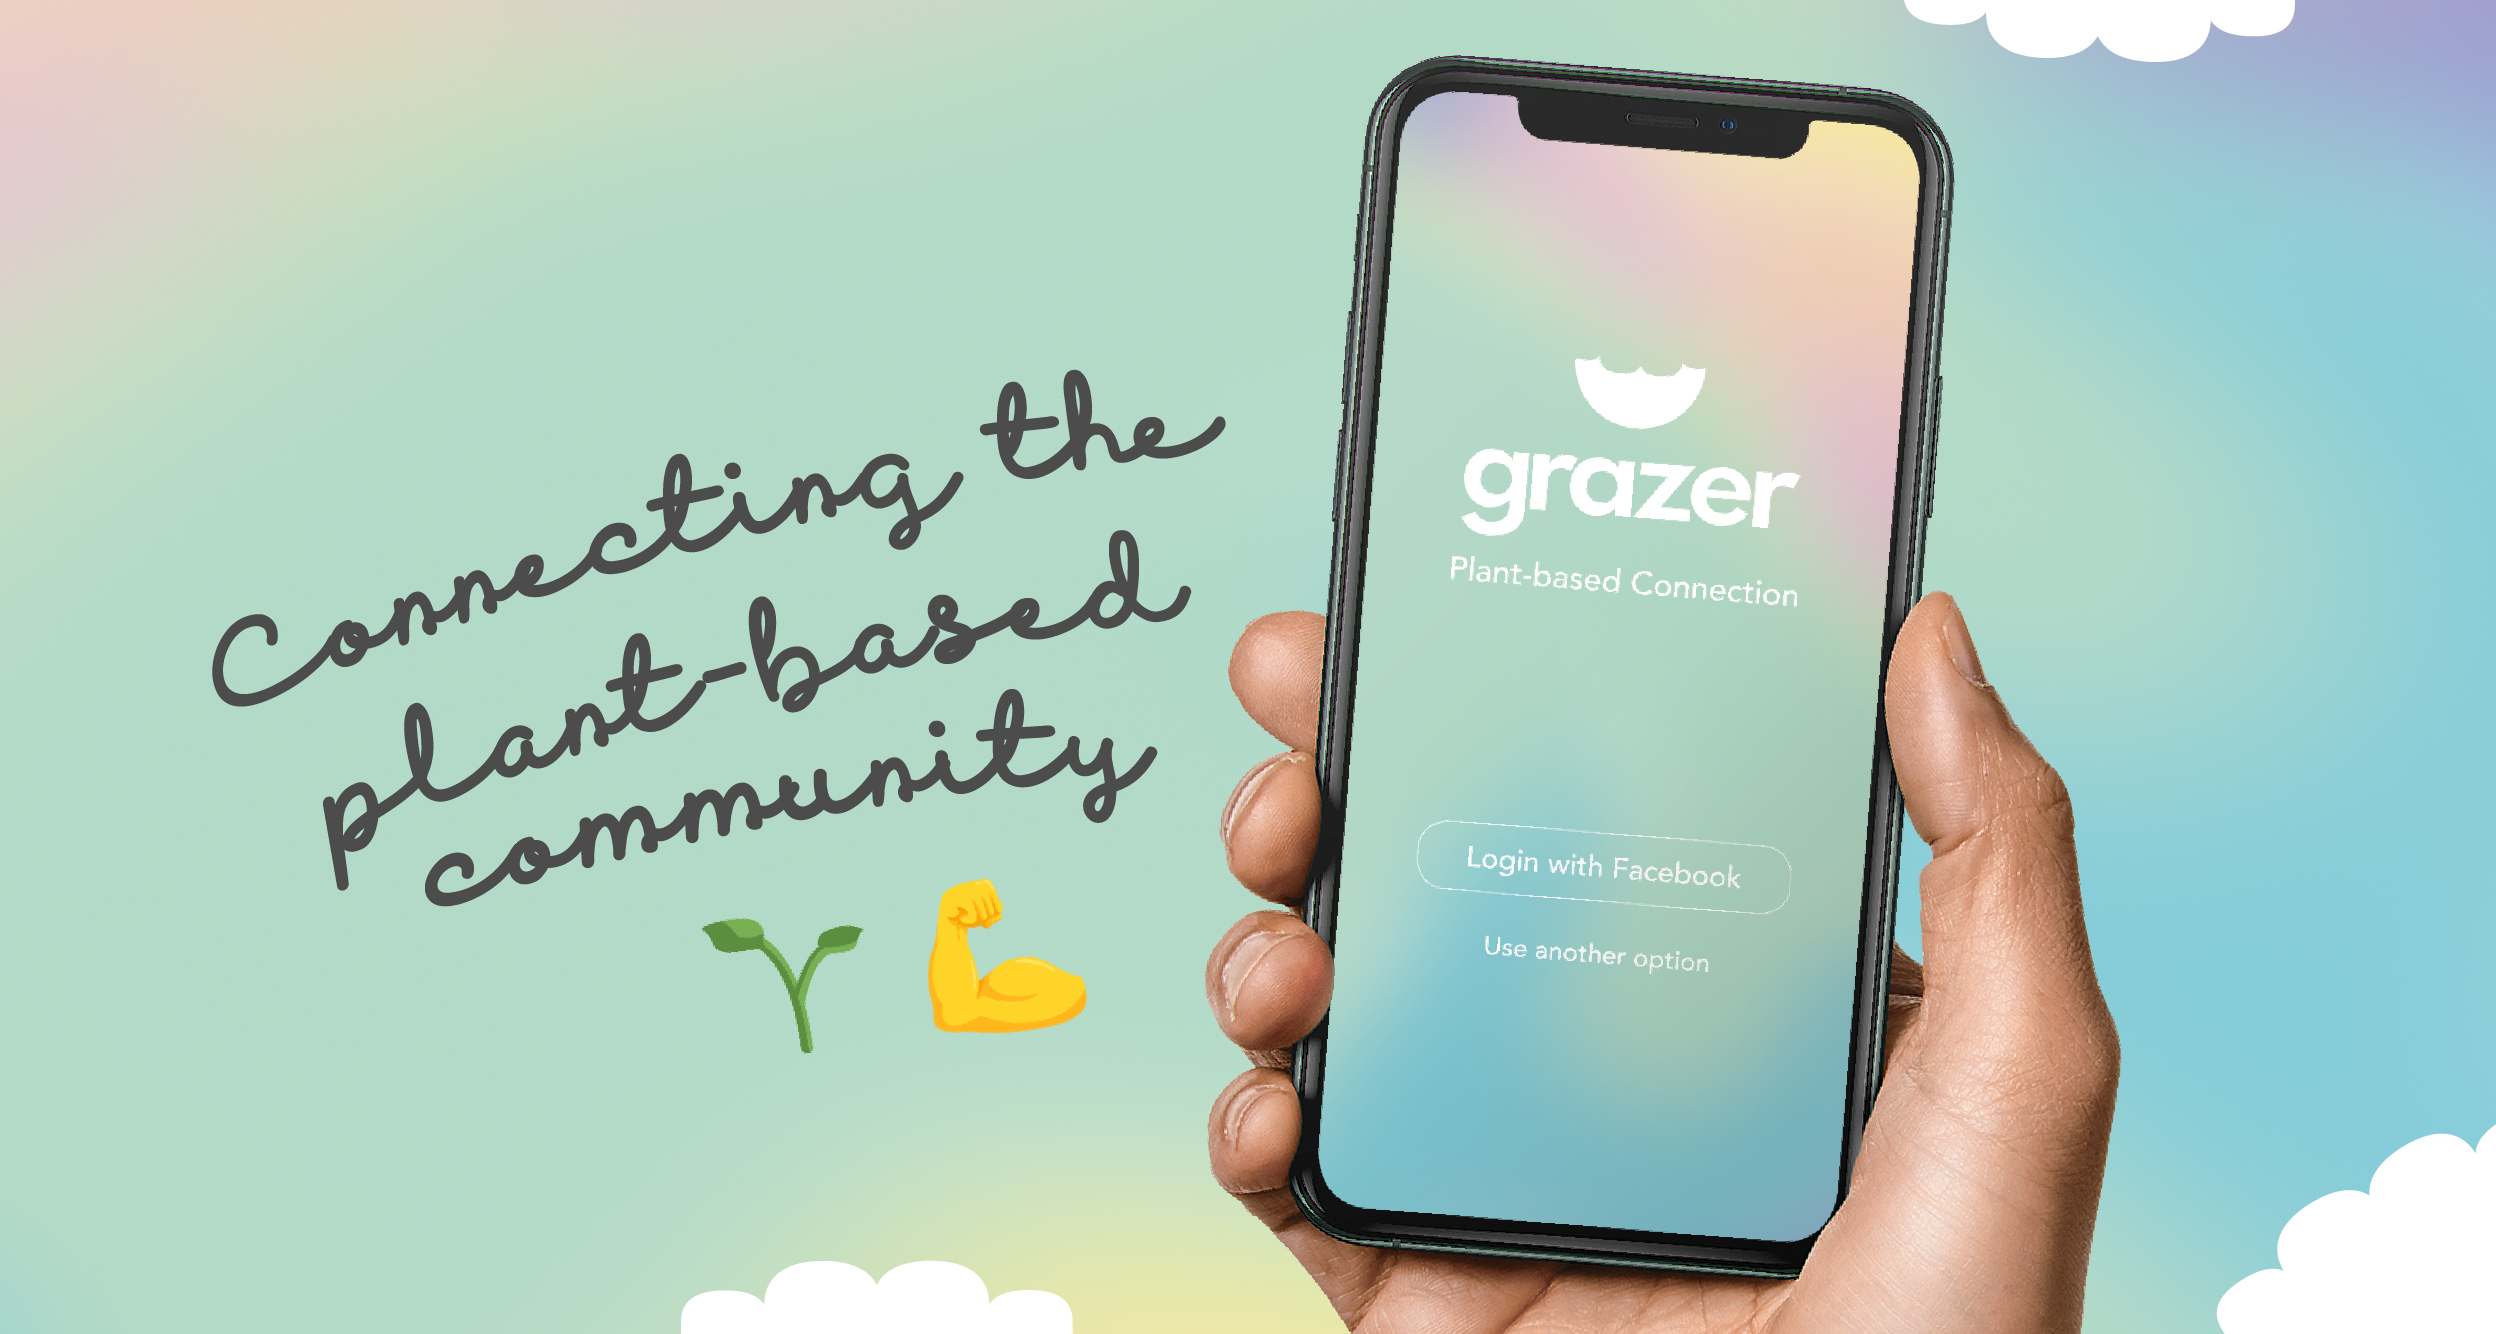 Meet Grazer, the dating and friend-finding app for vegans and vegetarians